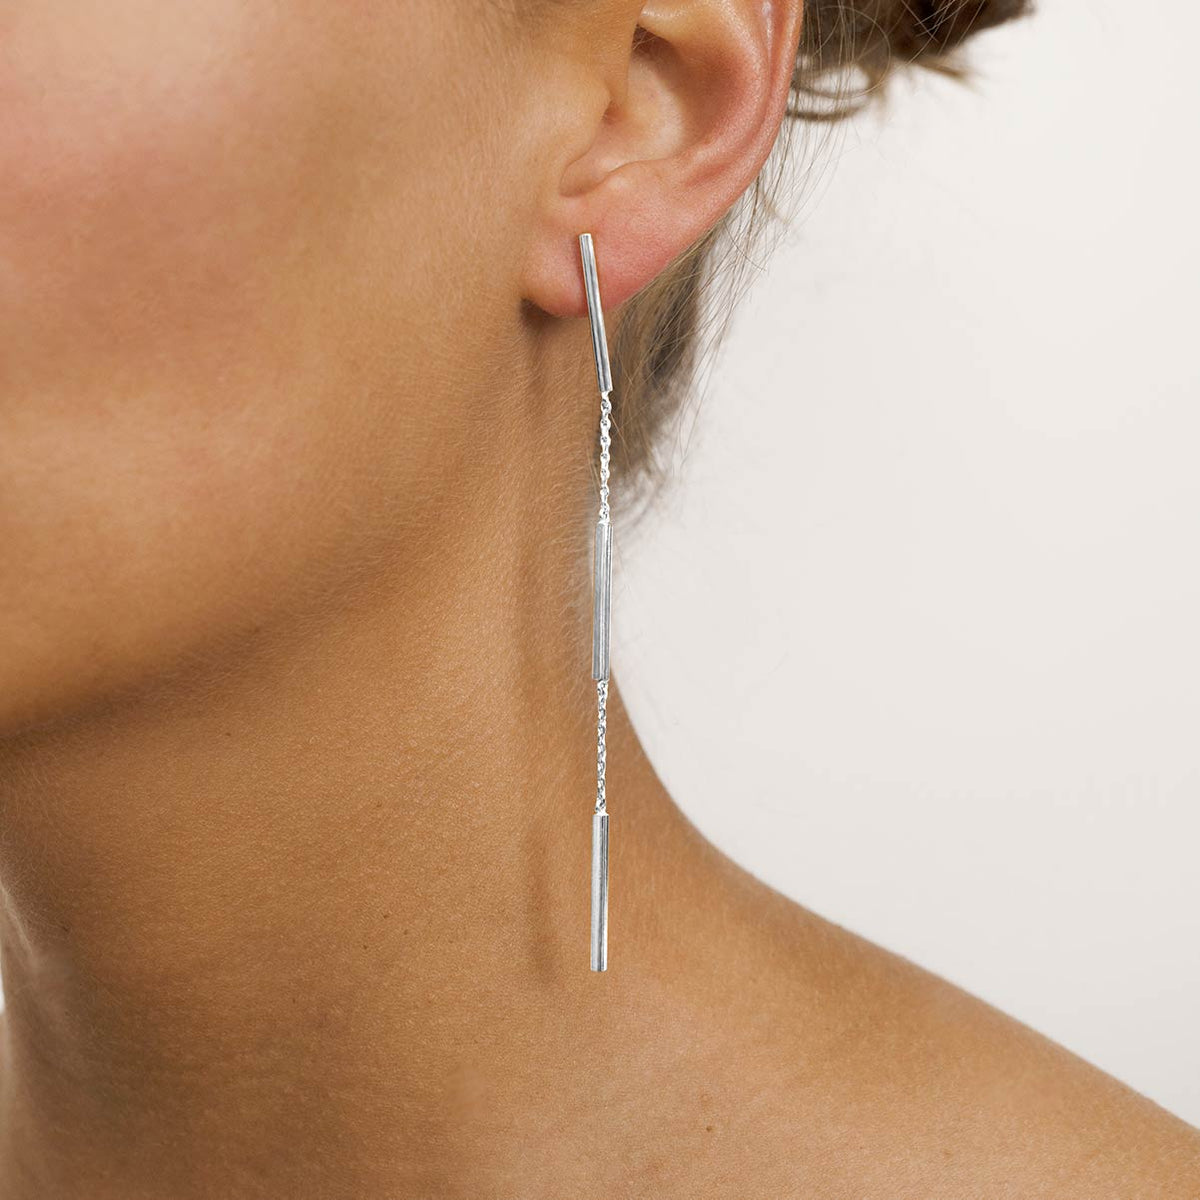 THE MAGNICITY LONG EARRINGS